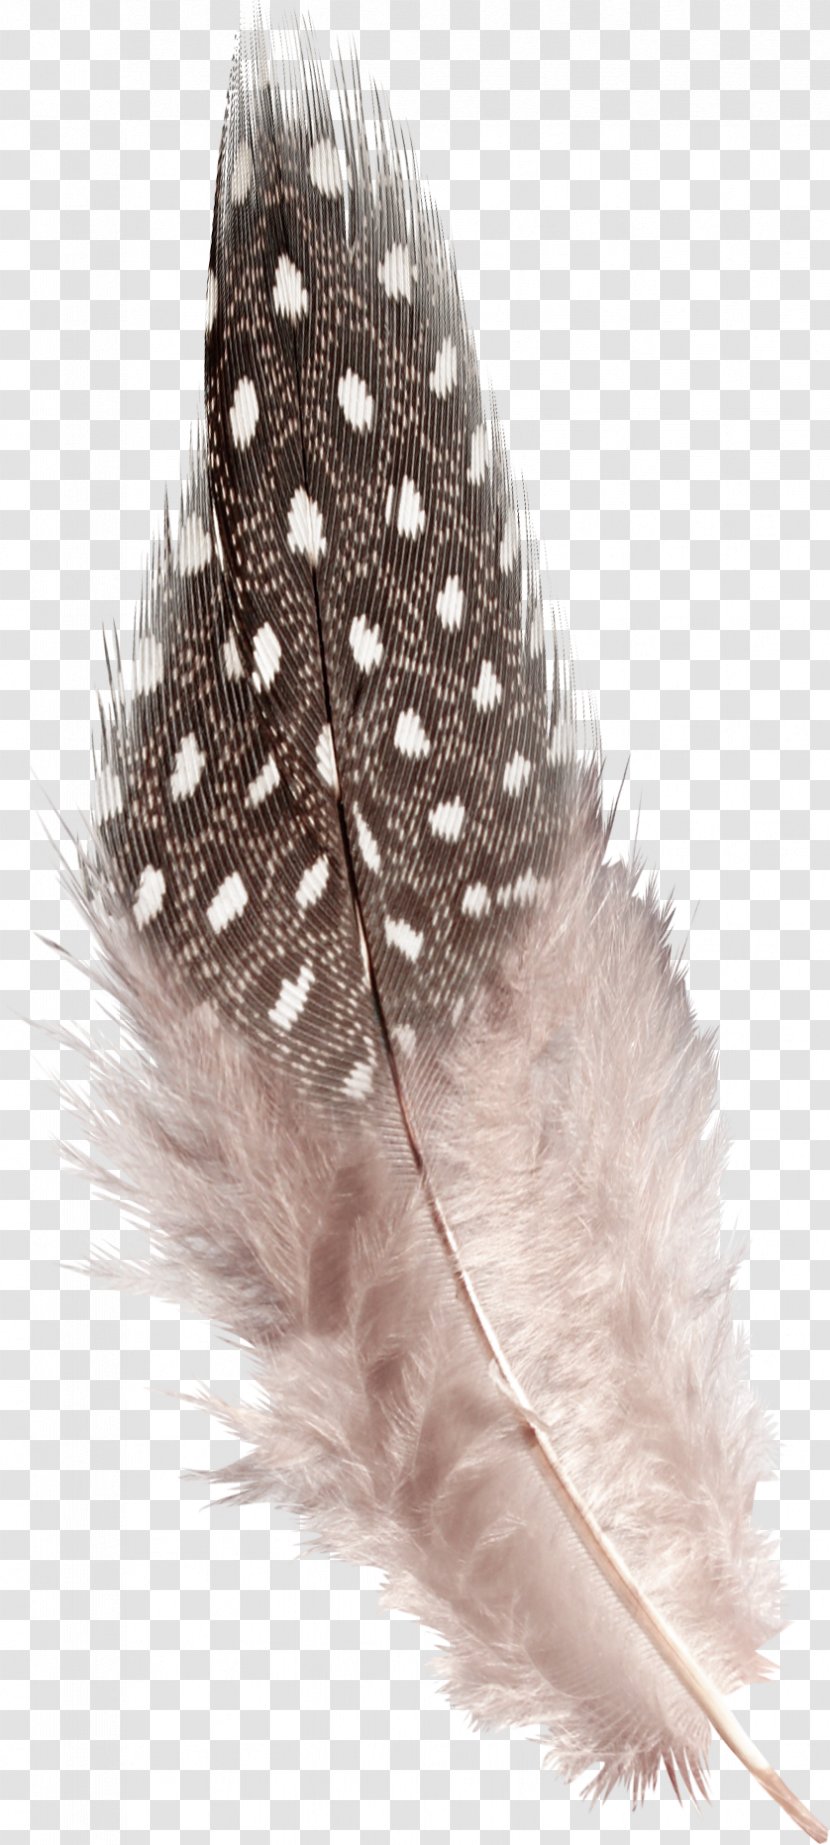 Caudipteryx Feather Download - Fern - Pheasant Tail Transparent PNG